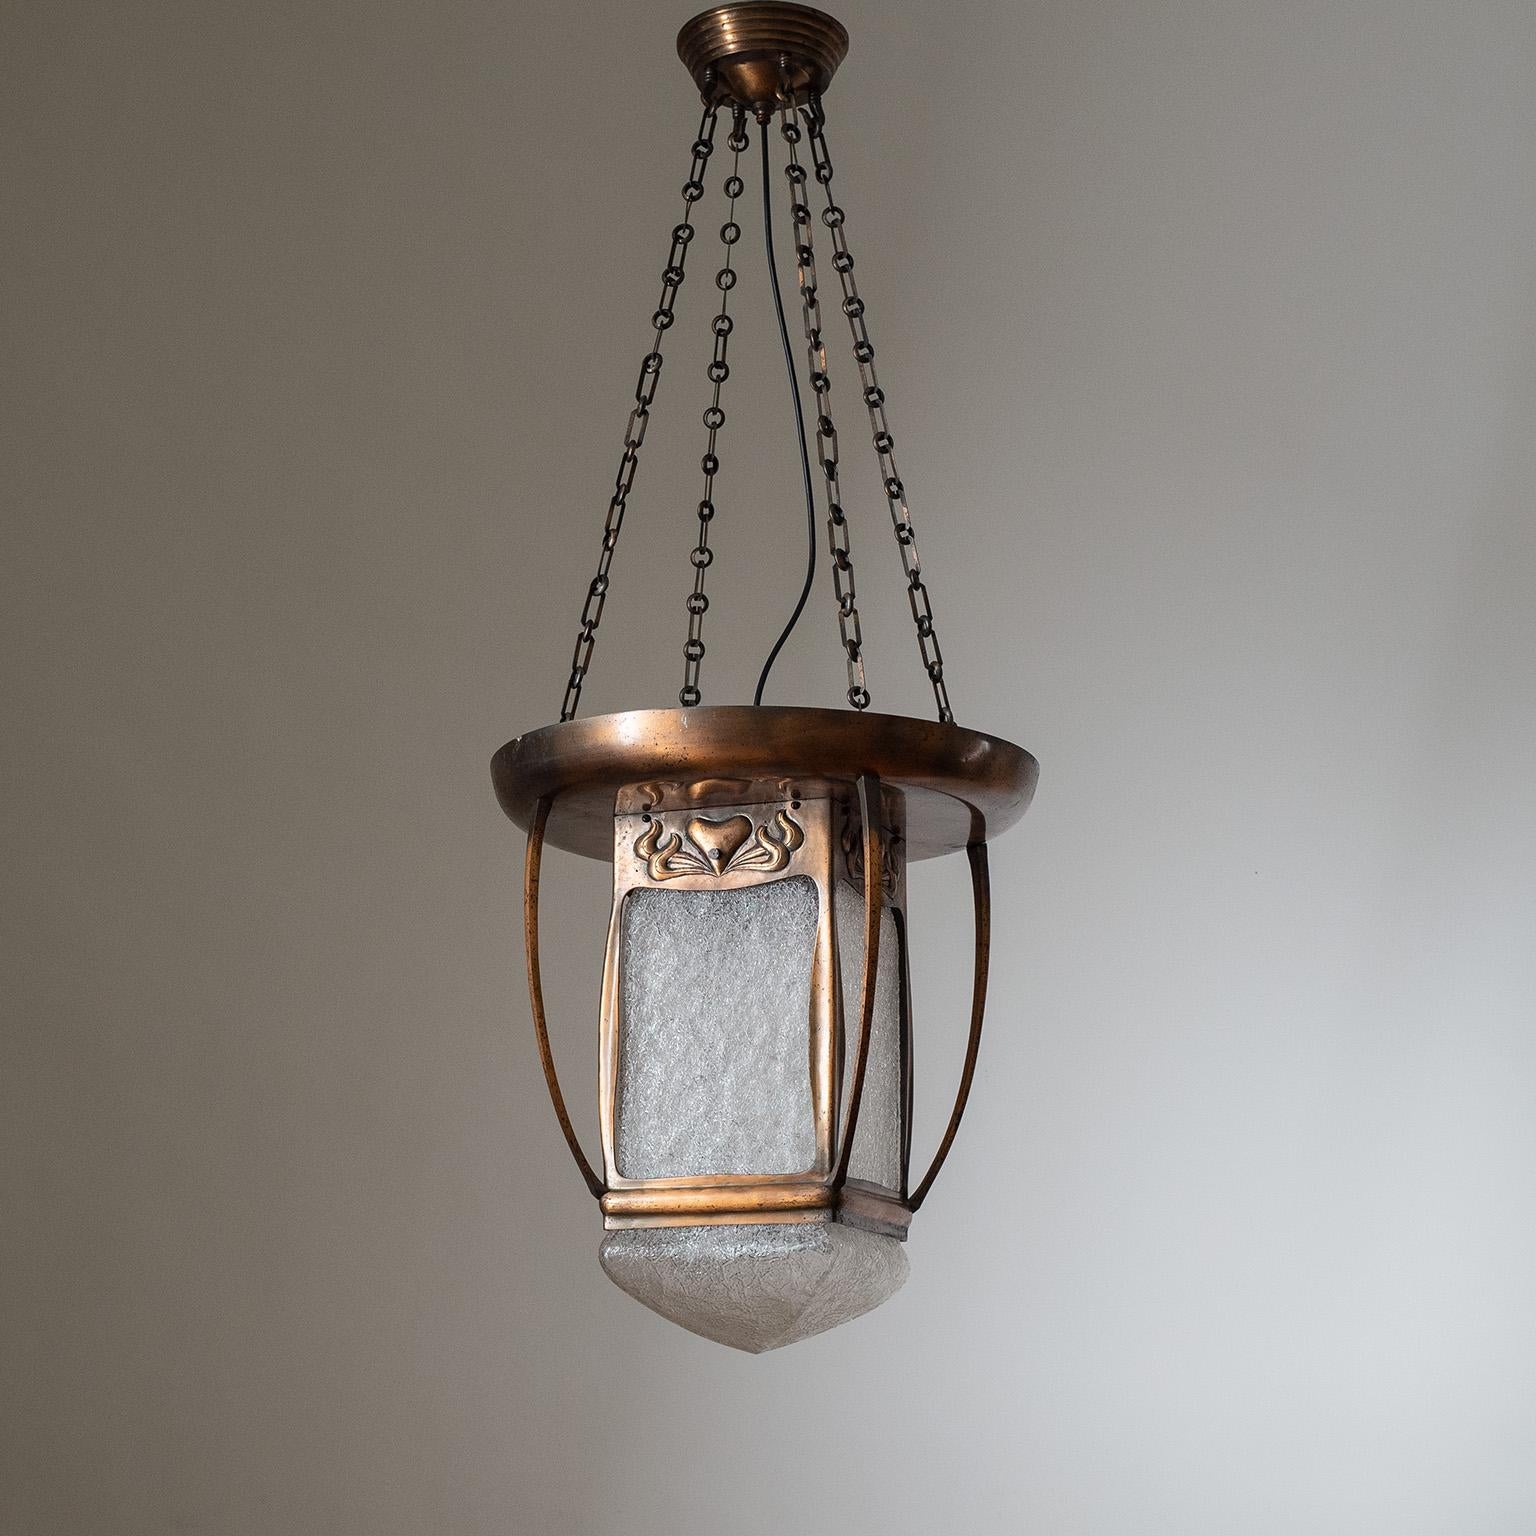 Rare Art Nouveau or Jugendstil Lantern from the early 20th century. All copper construction with a large textured glass diffuser. The large body is suspended by four copper chains and can easily be height adjusted. One original brass and ceramic E27